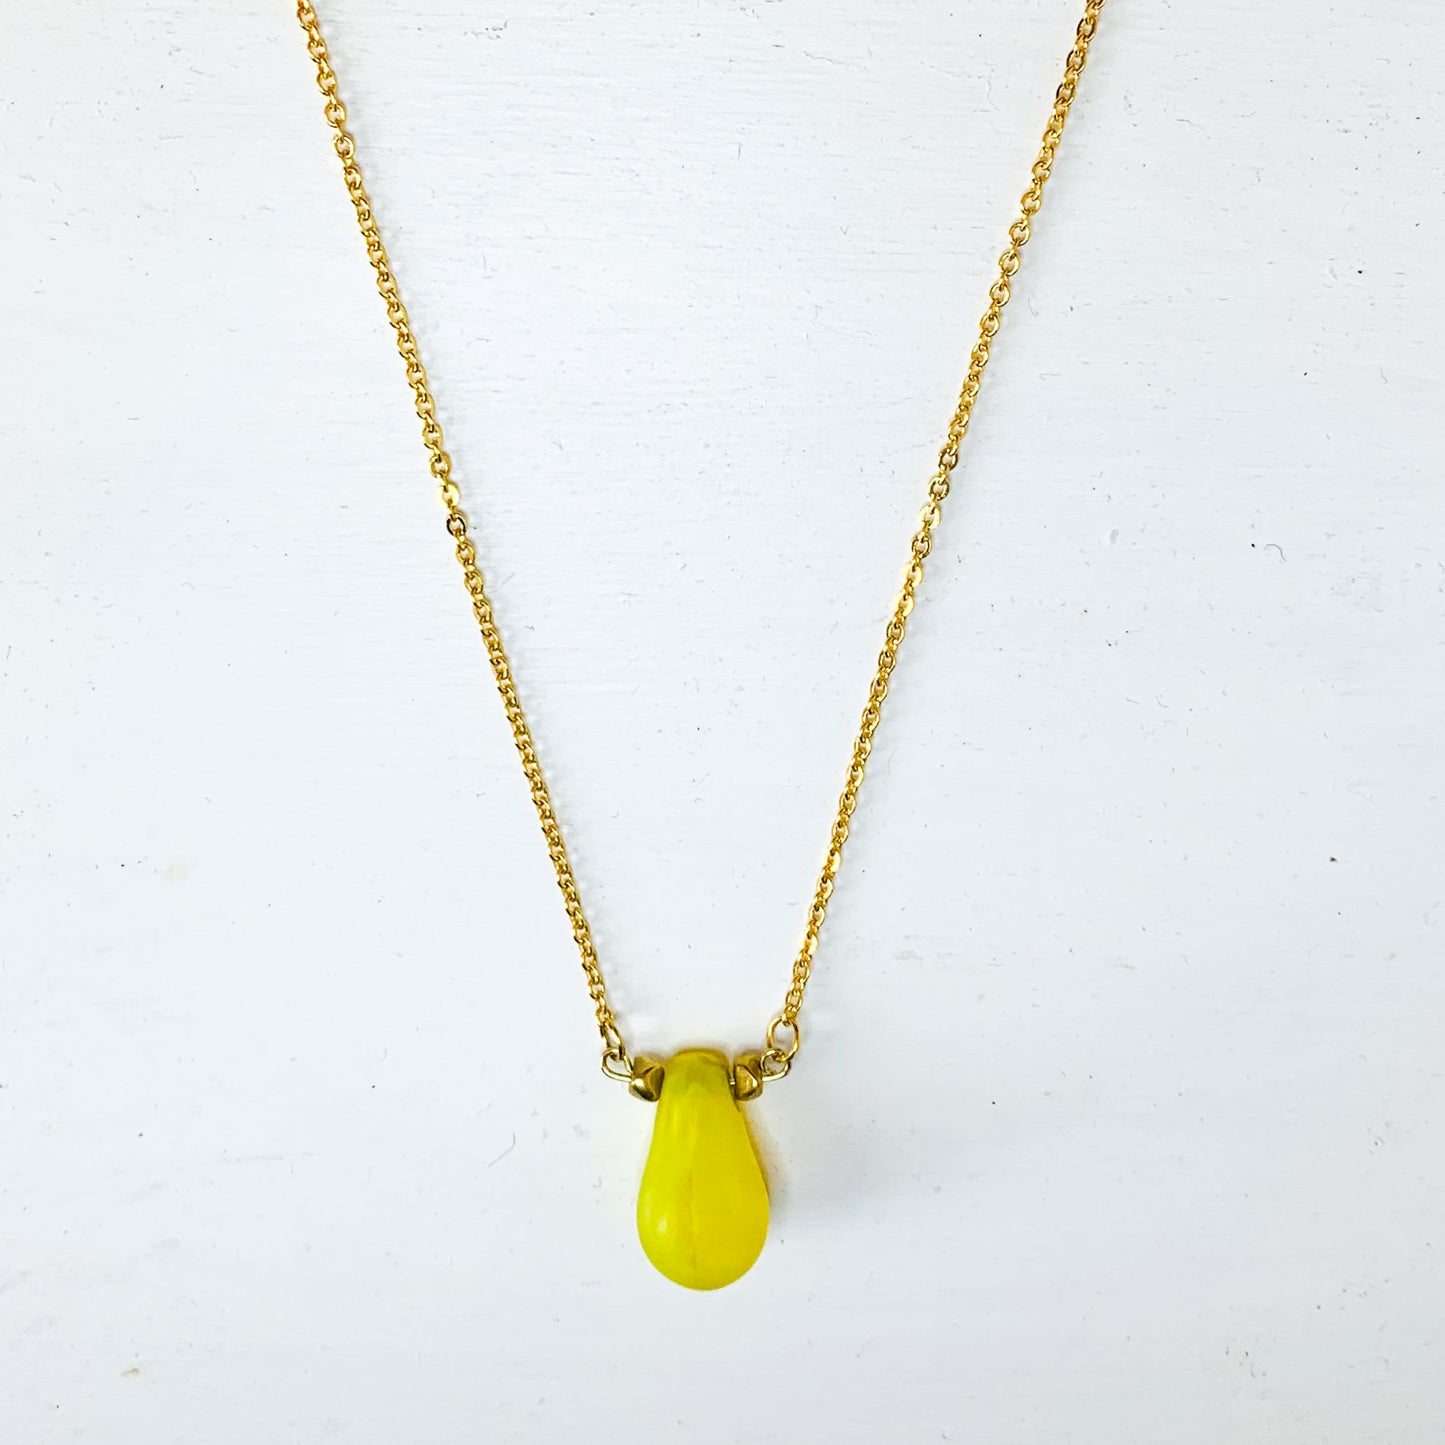 Mali Vintage Bridal Bead Necklace in Yellow